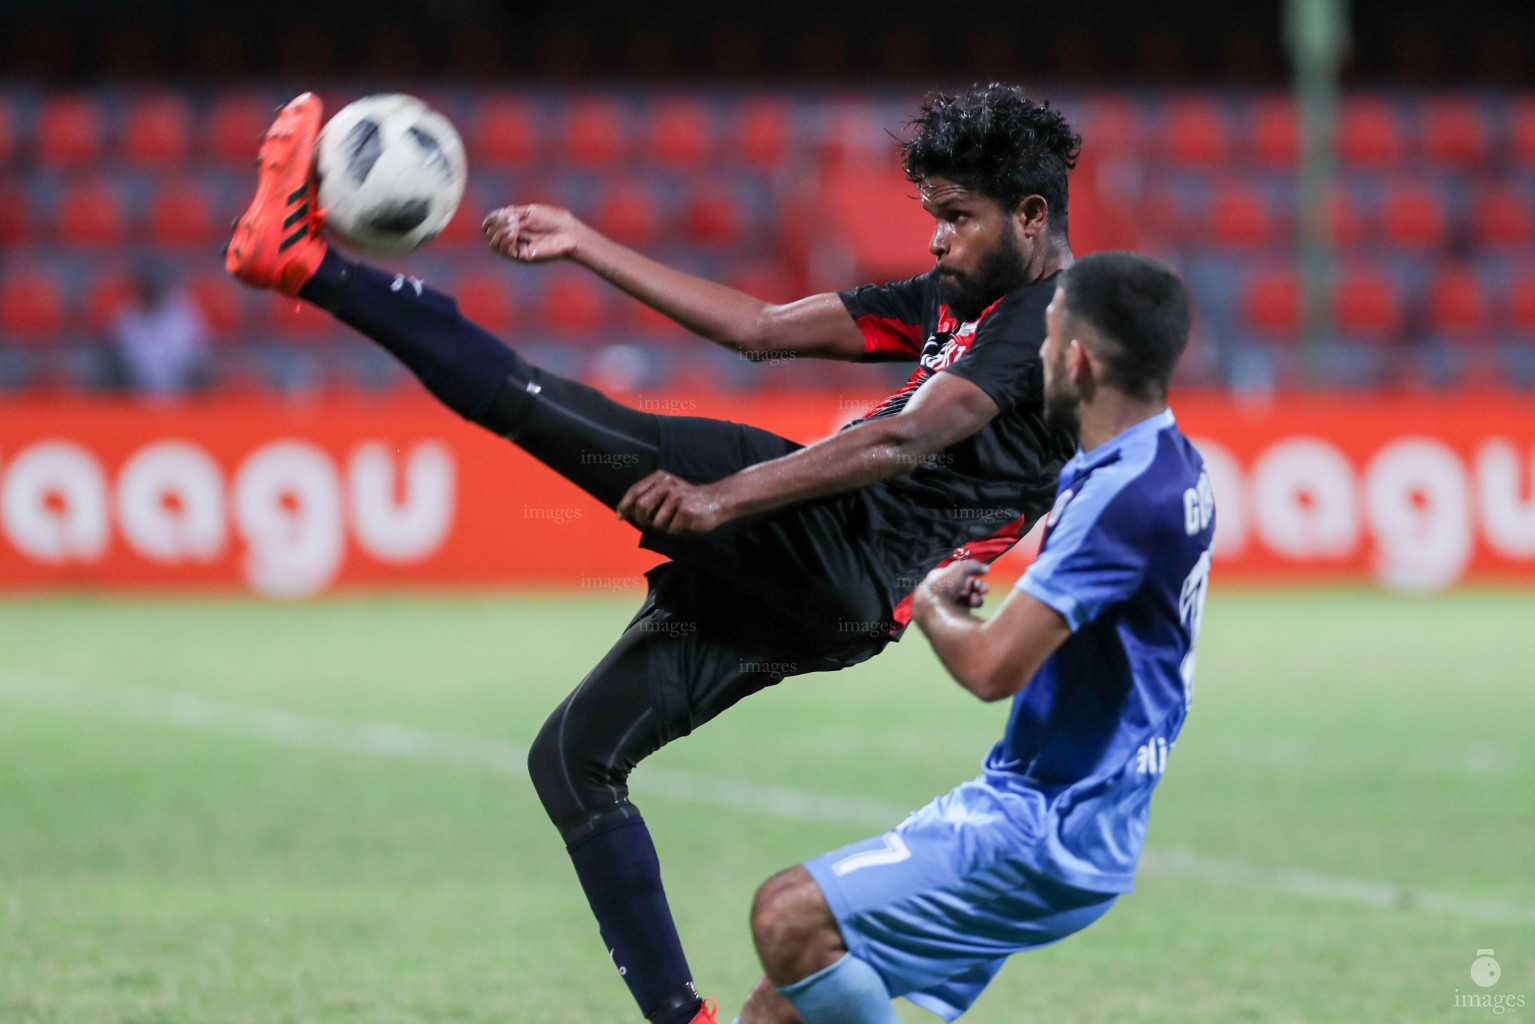 New Radiant SC vs Nilandhoo in Dhiraagu Dhivehi Premier League 2018 in Male, Maldives, Friday, October 12, 2018. (Images.mv Photo/Suadh Abdul Sattar)